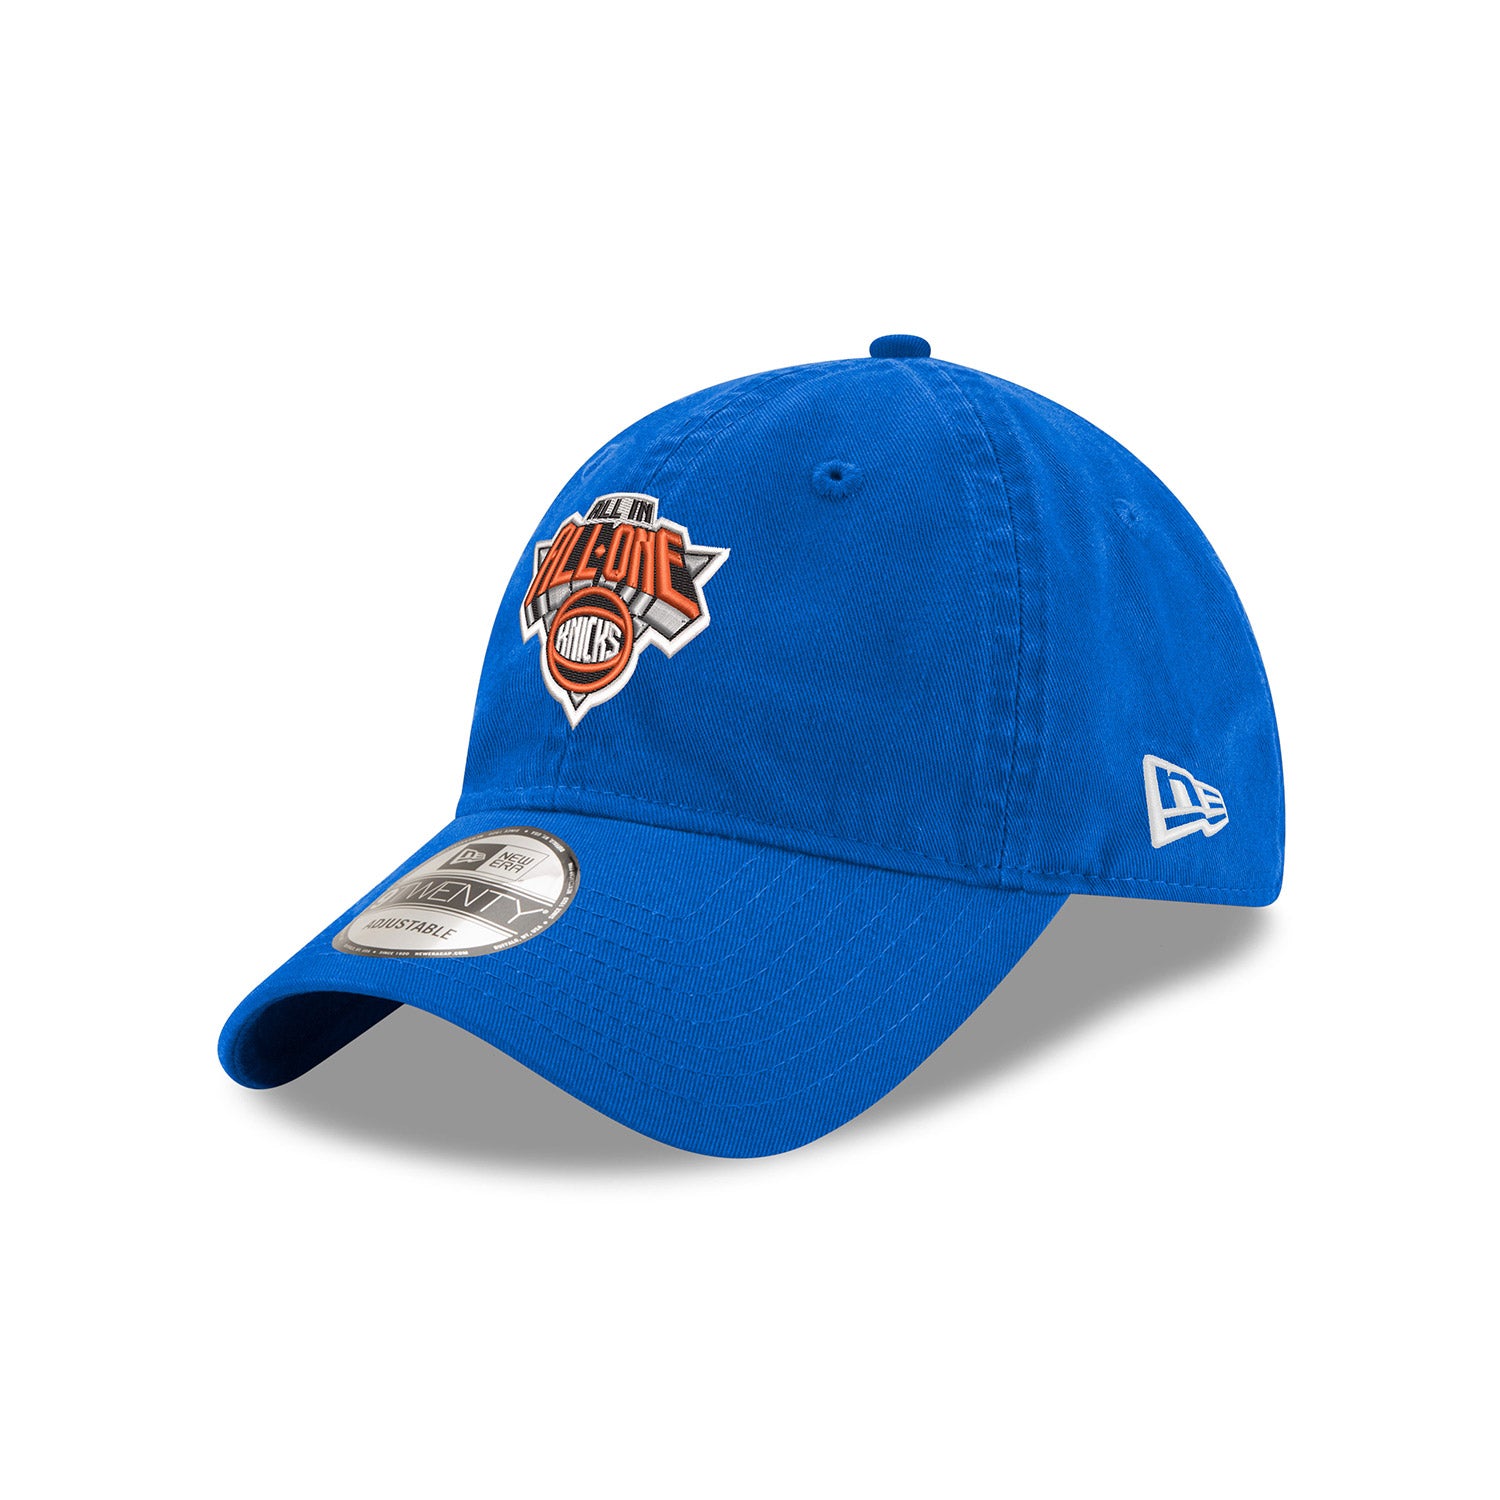 New Era Knicks 22-23 All in All One 920 Hat